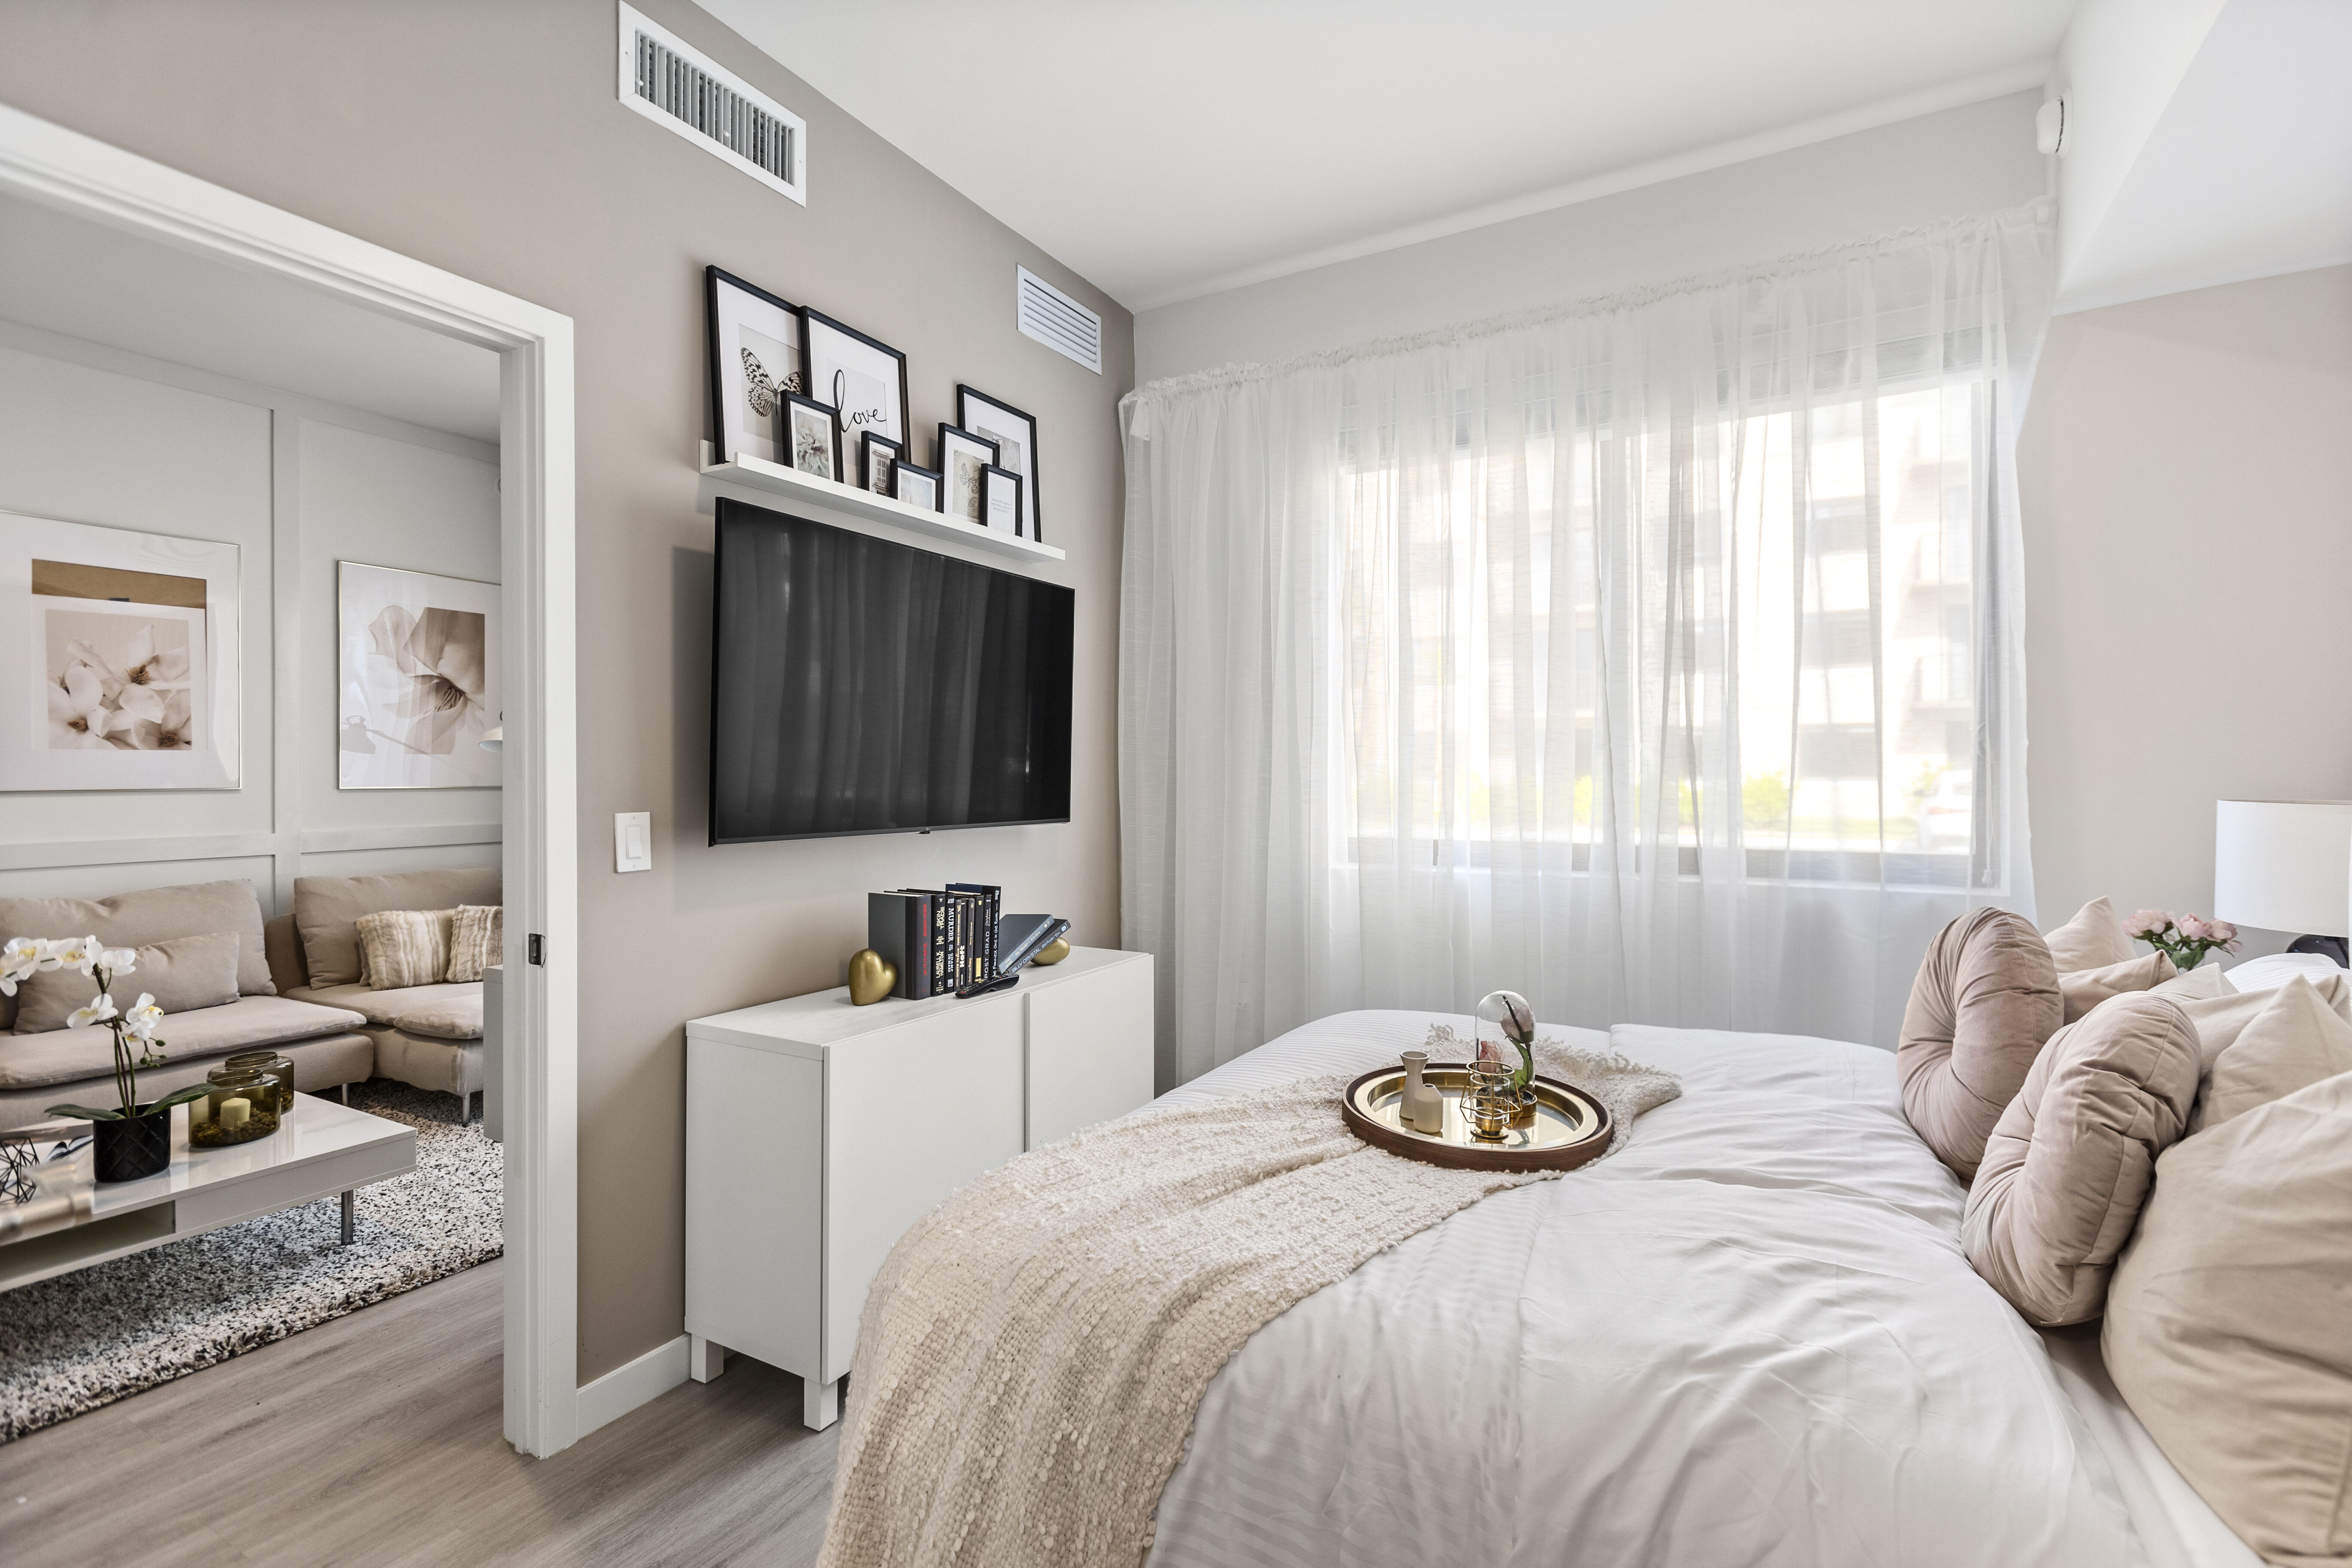 At Pine Ridge in West Palm Beach, Florida, a furnished apartment model bedroom features natural light, modern furnishings, and stylish wood-style flooring